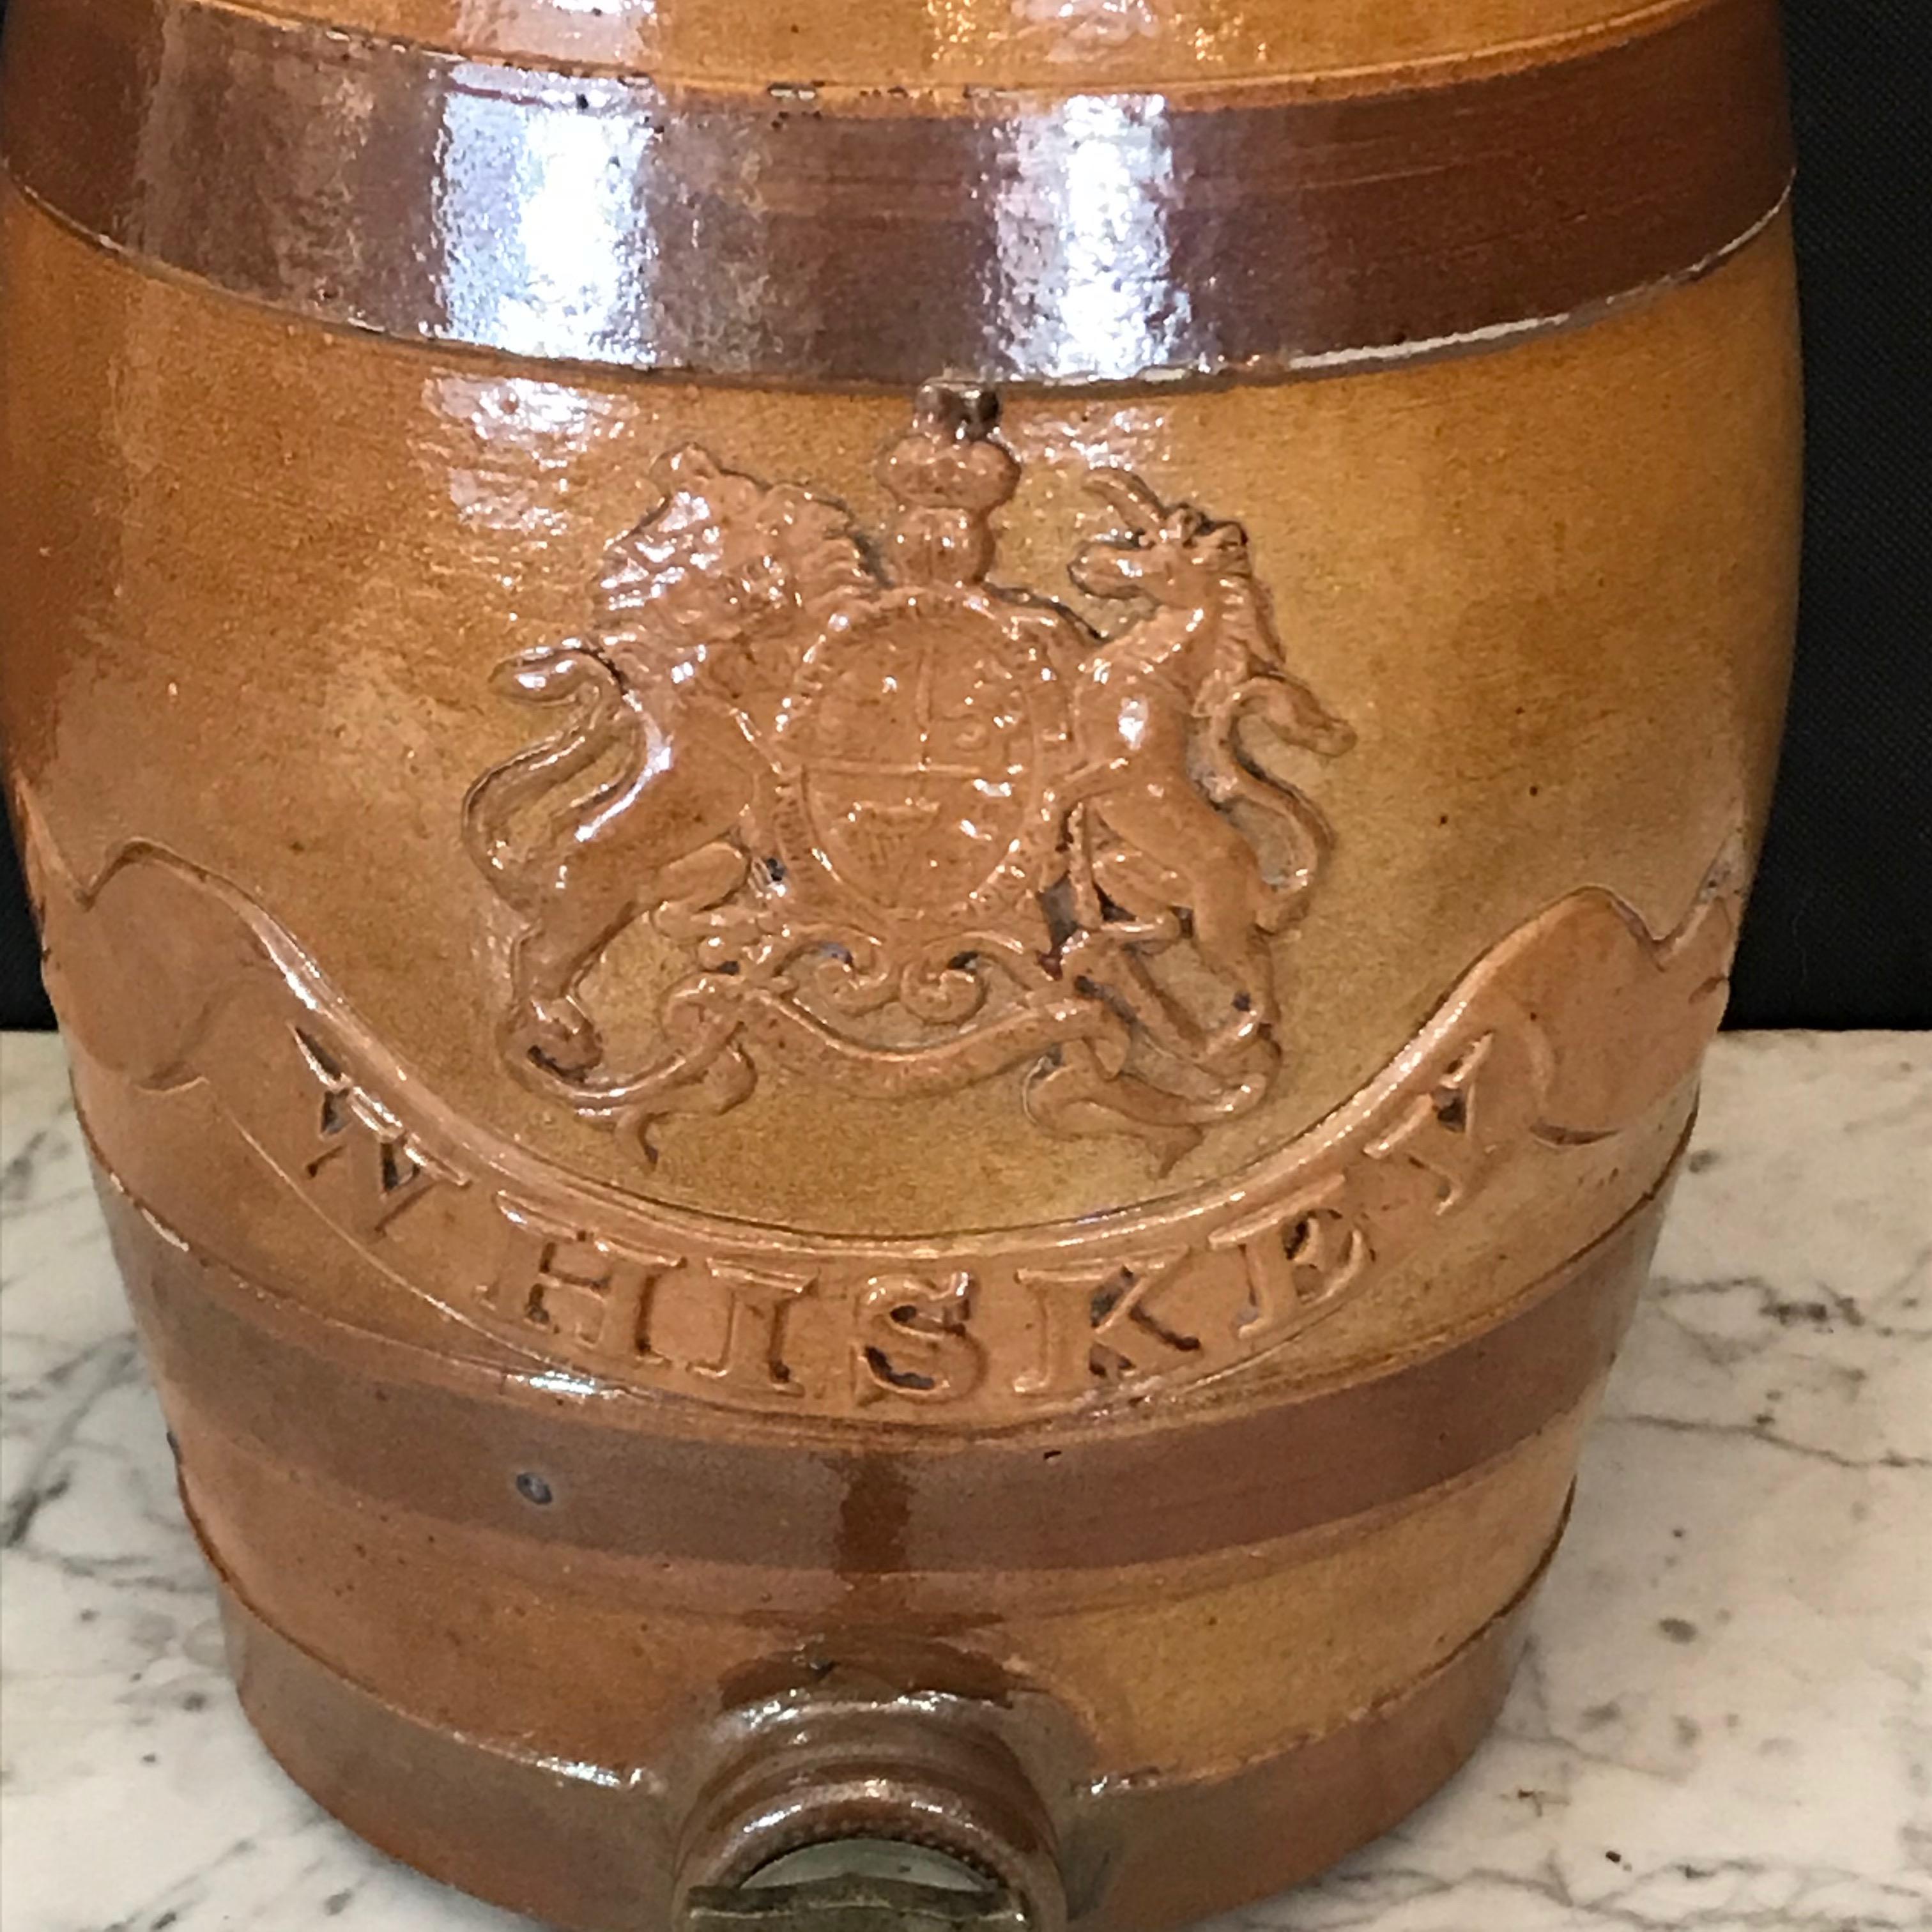 An English stoneware spirit barrel from the mid-19th century. The glazed body is shaped like a barrel decorated with low-reliefs depicting the United Kingdom’s royal coat of arms, complete with a lion on the left and a unicorn on the right. Above